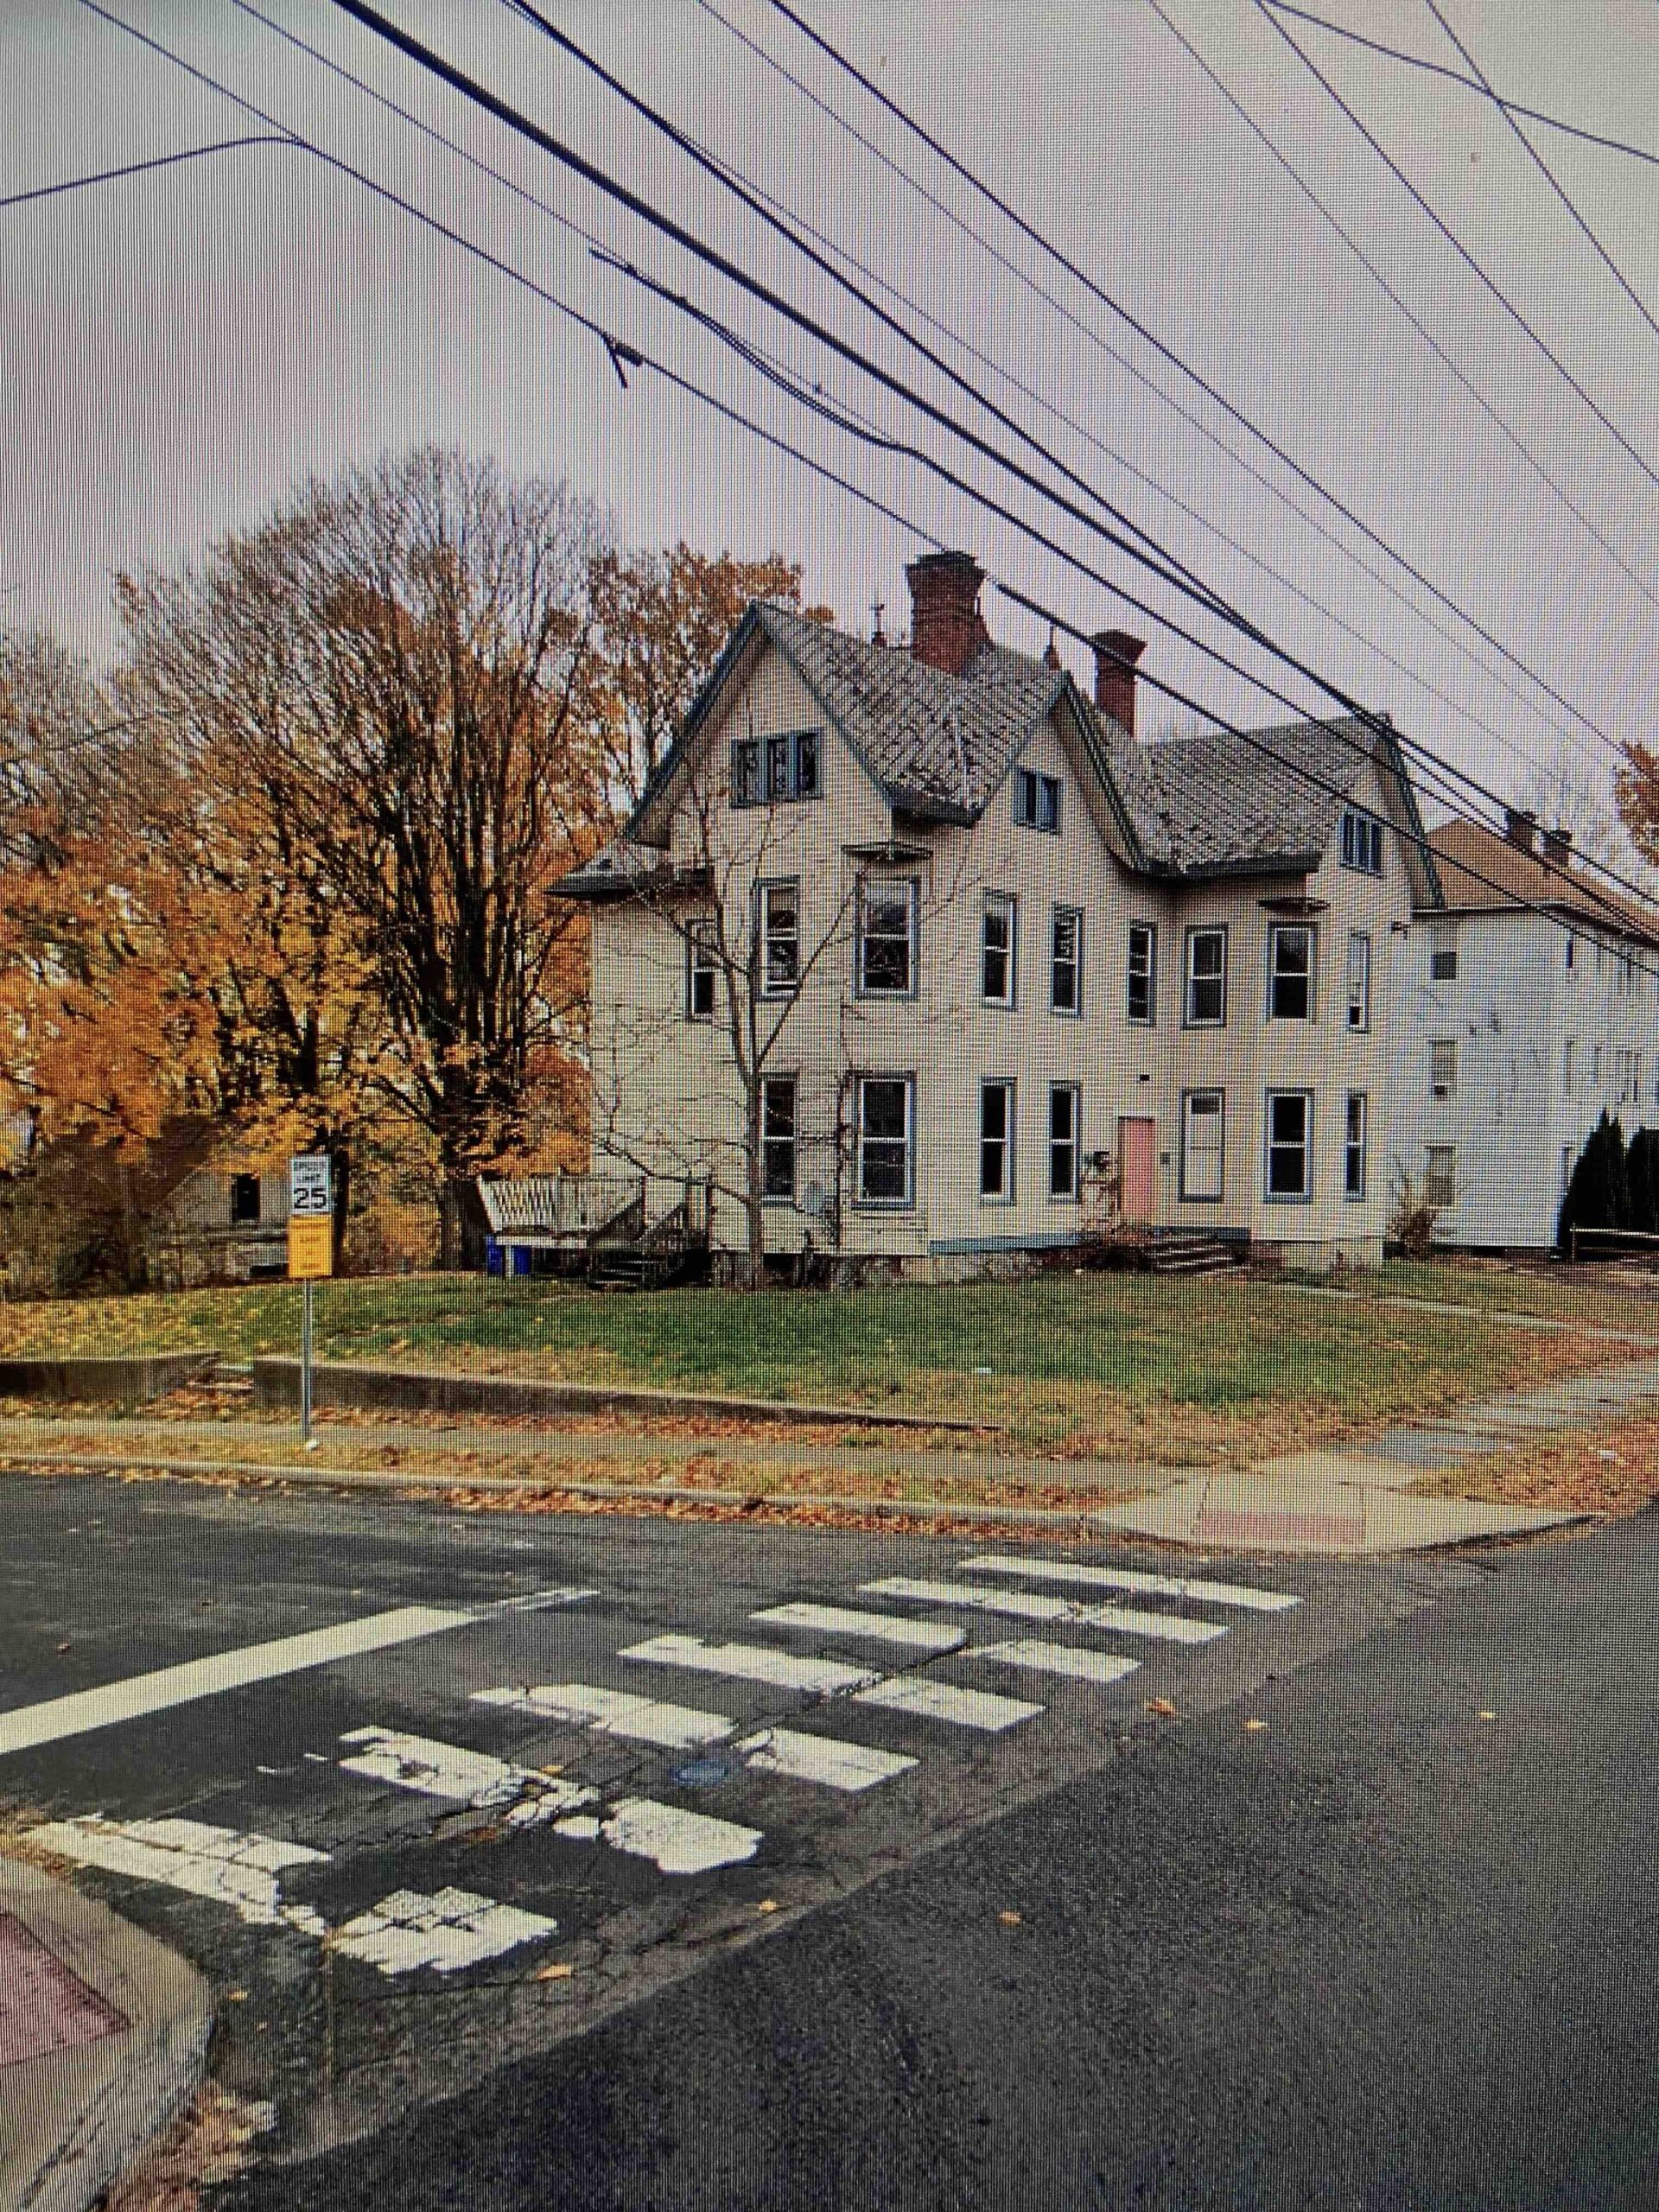 From Google Maps (linked to the source), the former home of Ben Kennard, Meriden, CT.